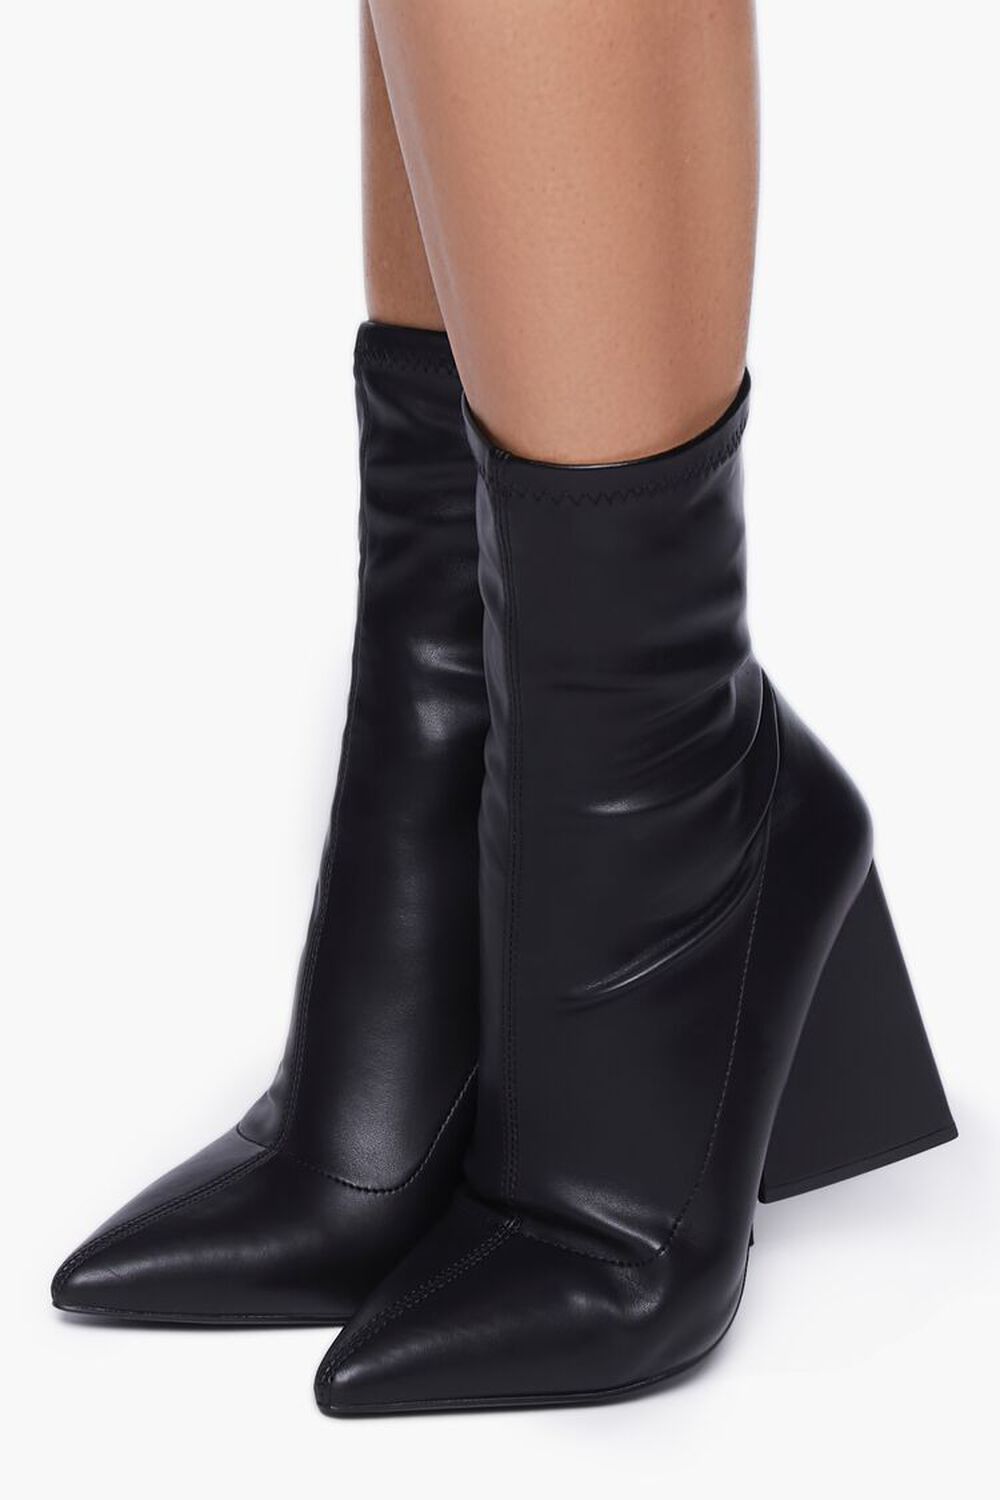 BLACK Faux Leather Pointed Booties, image 1